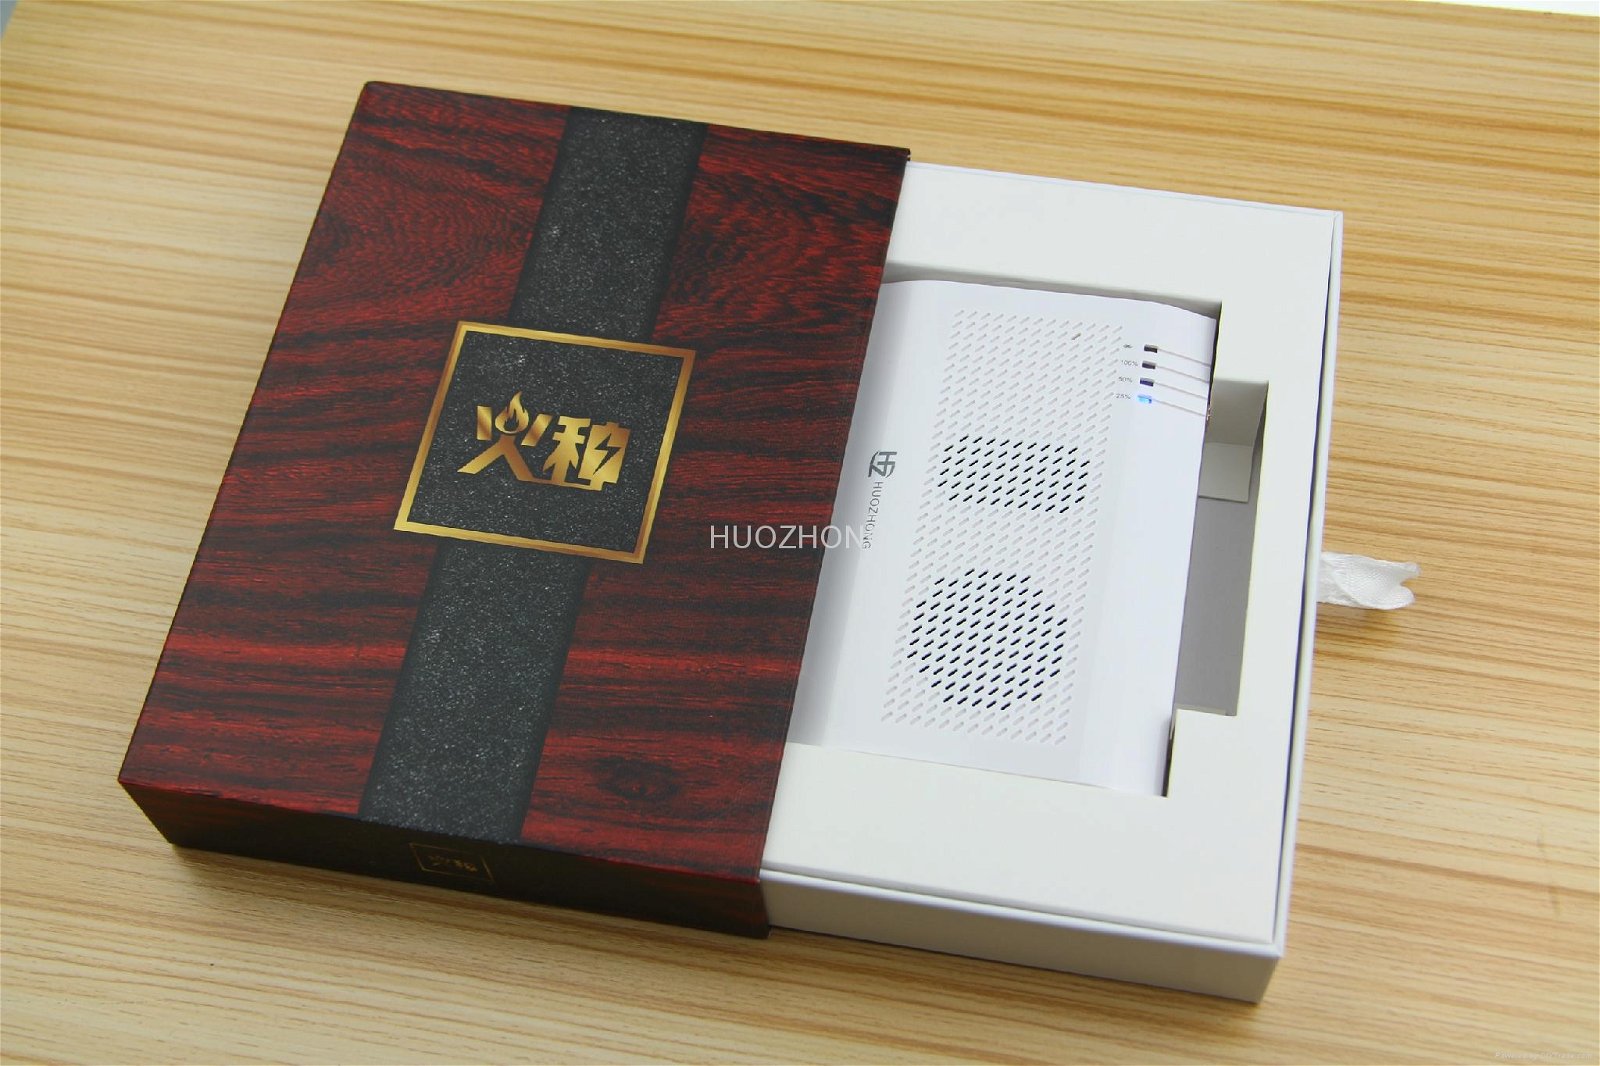 Portable Power Bank with Bluetooth Speakers 2